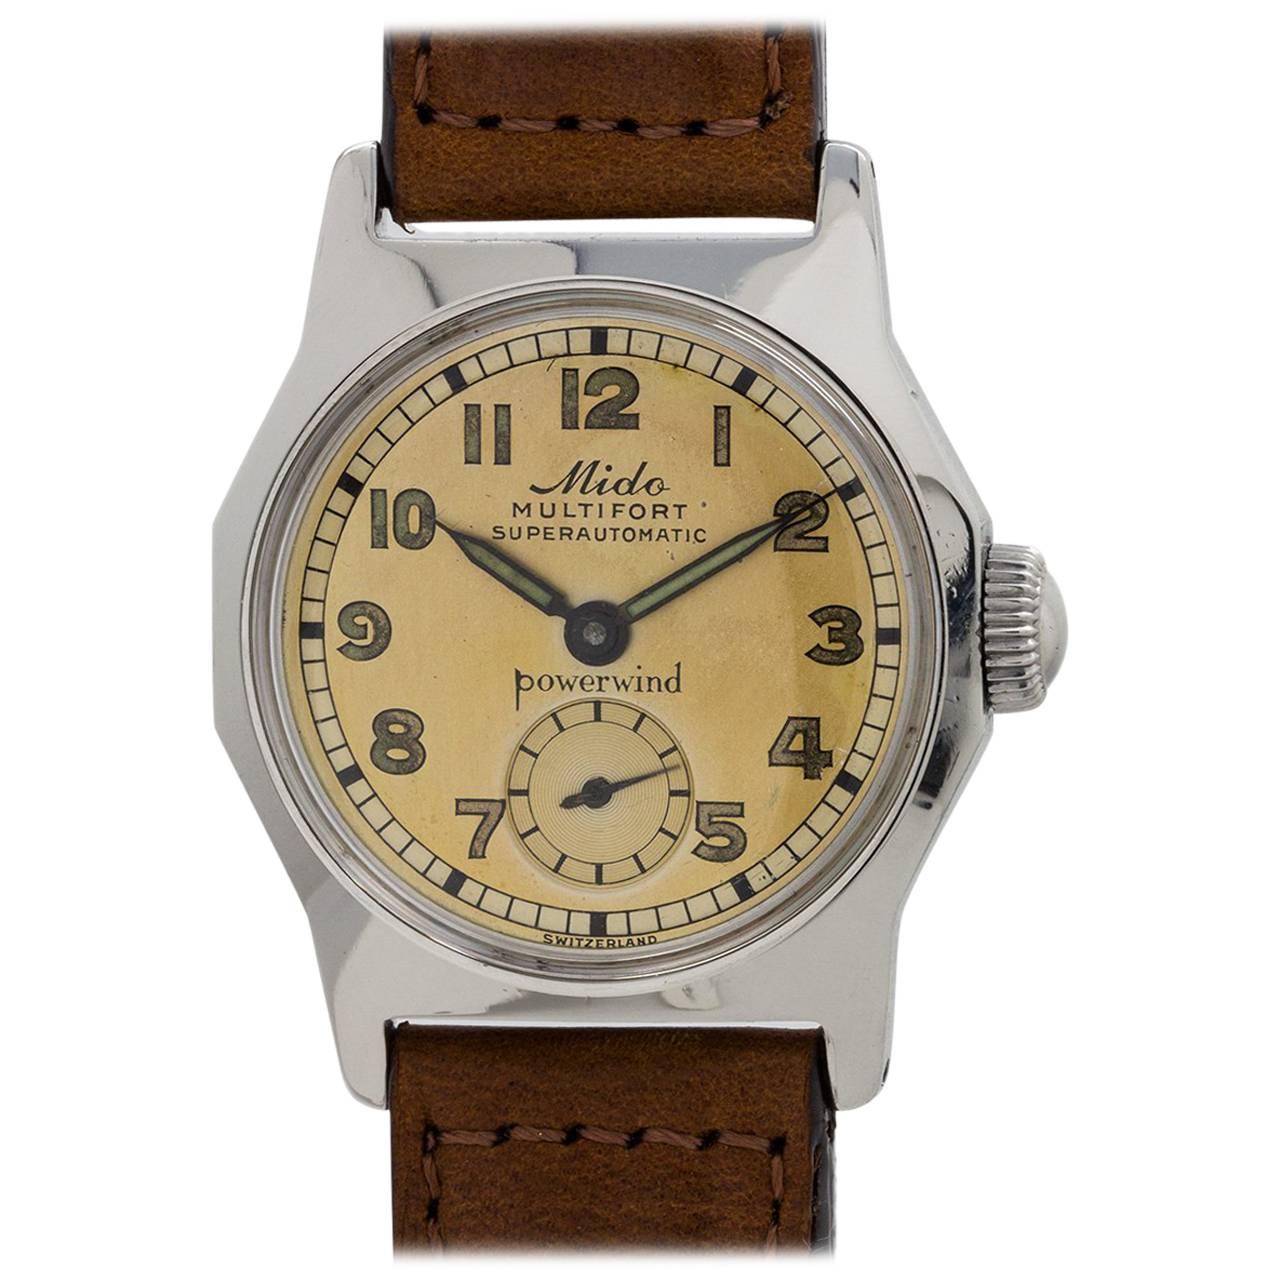 Mido Stainless Steel Multifort Midsize Automatic Wristwatch, circa 1950s